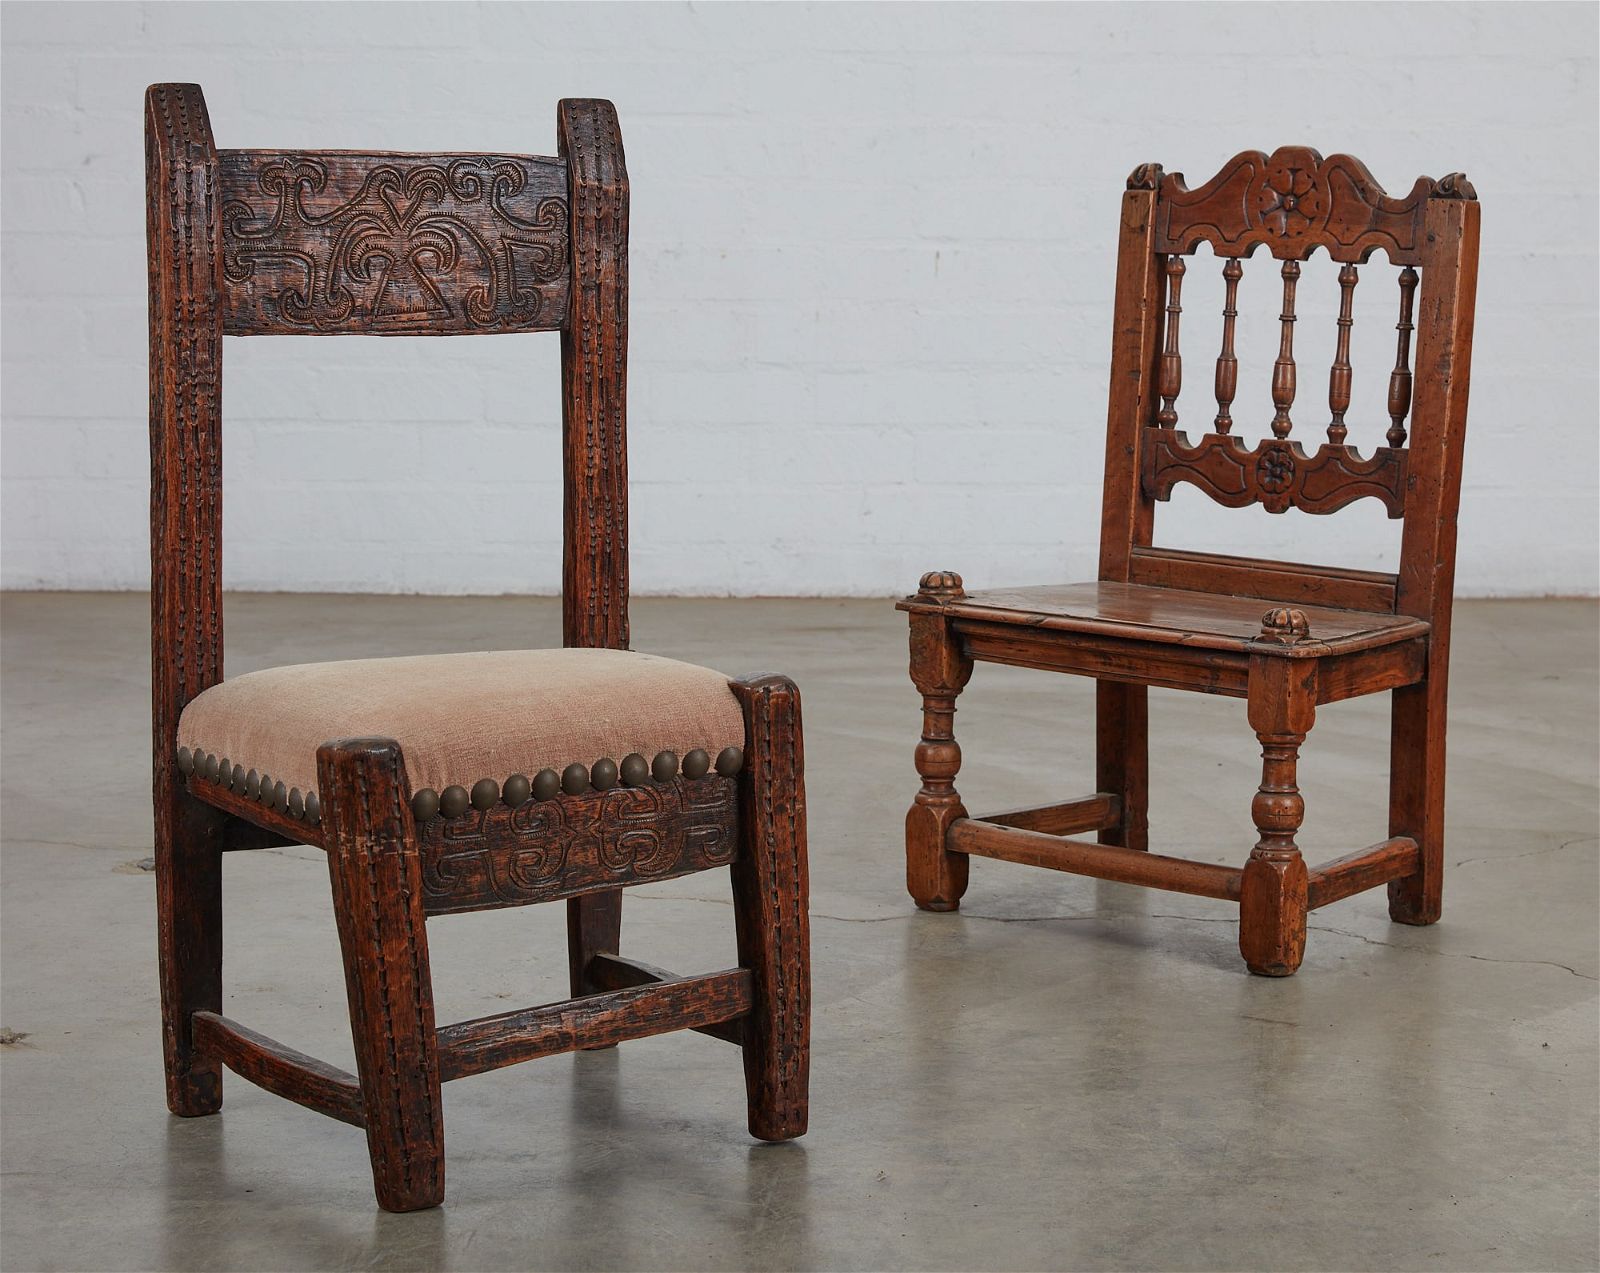 TWO CONTINENTAL BAROQUE LOW CHAIRSTwo 2fb38f6